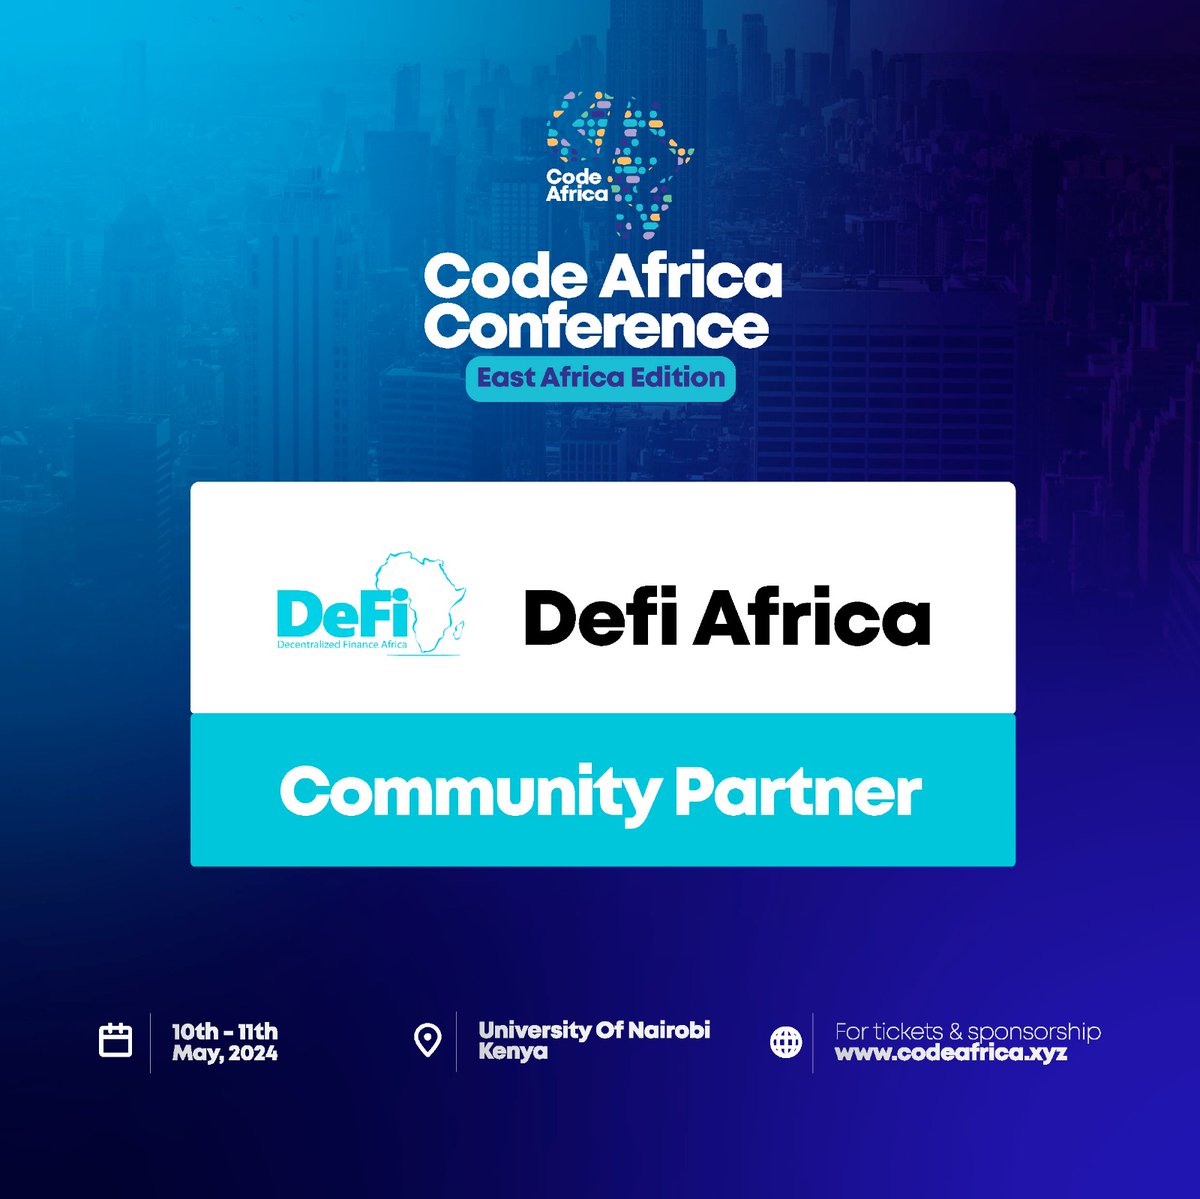 🎤📢 Exciting Partnership Announcement! 🌍 From Ghana to Kenya, and across Africa, we're thrilled to announce our collaboration with Code Africa to support the upcoming Code Africa Conference, East Africa Edition. Let's chart a path together towards success! @memoiafrica #Africa